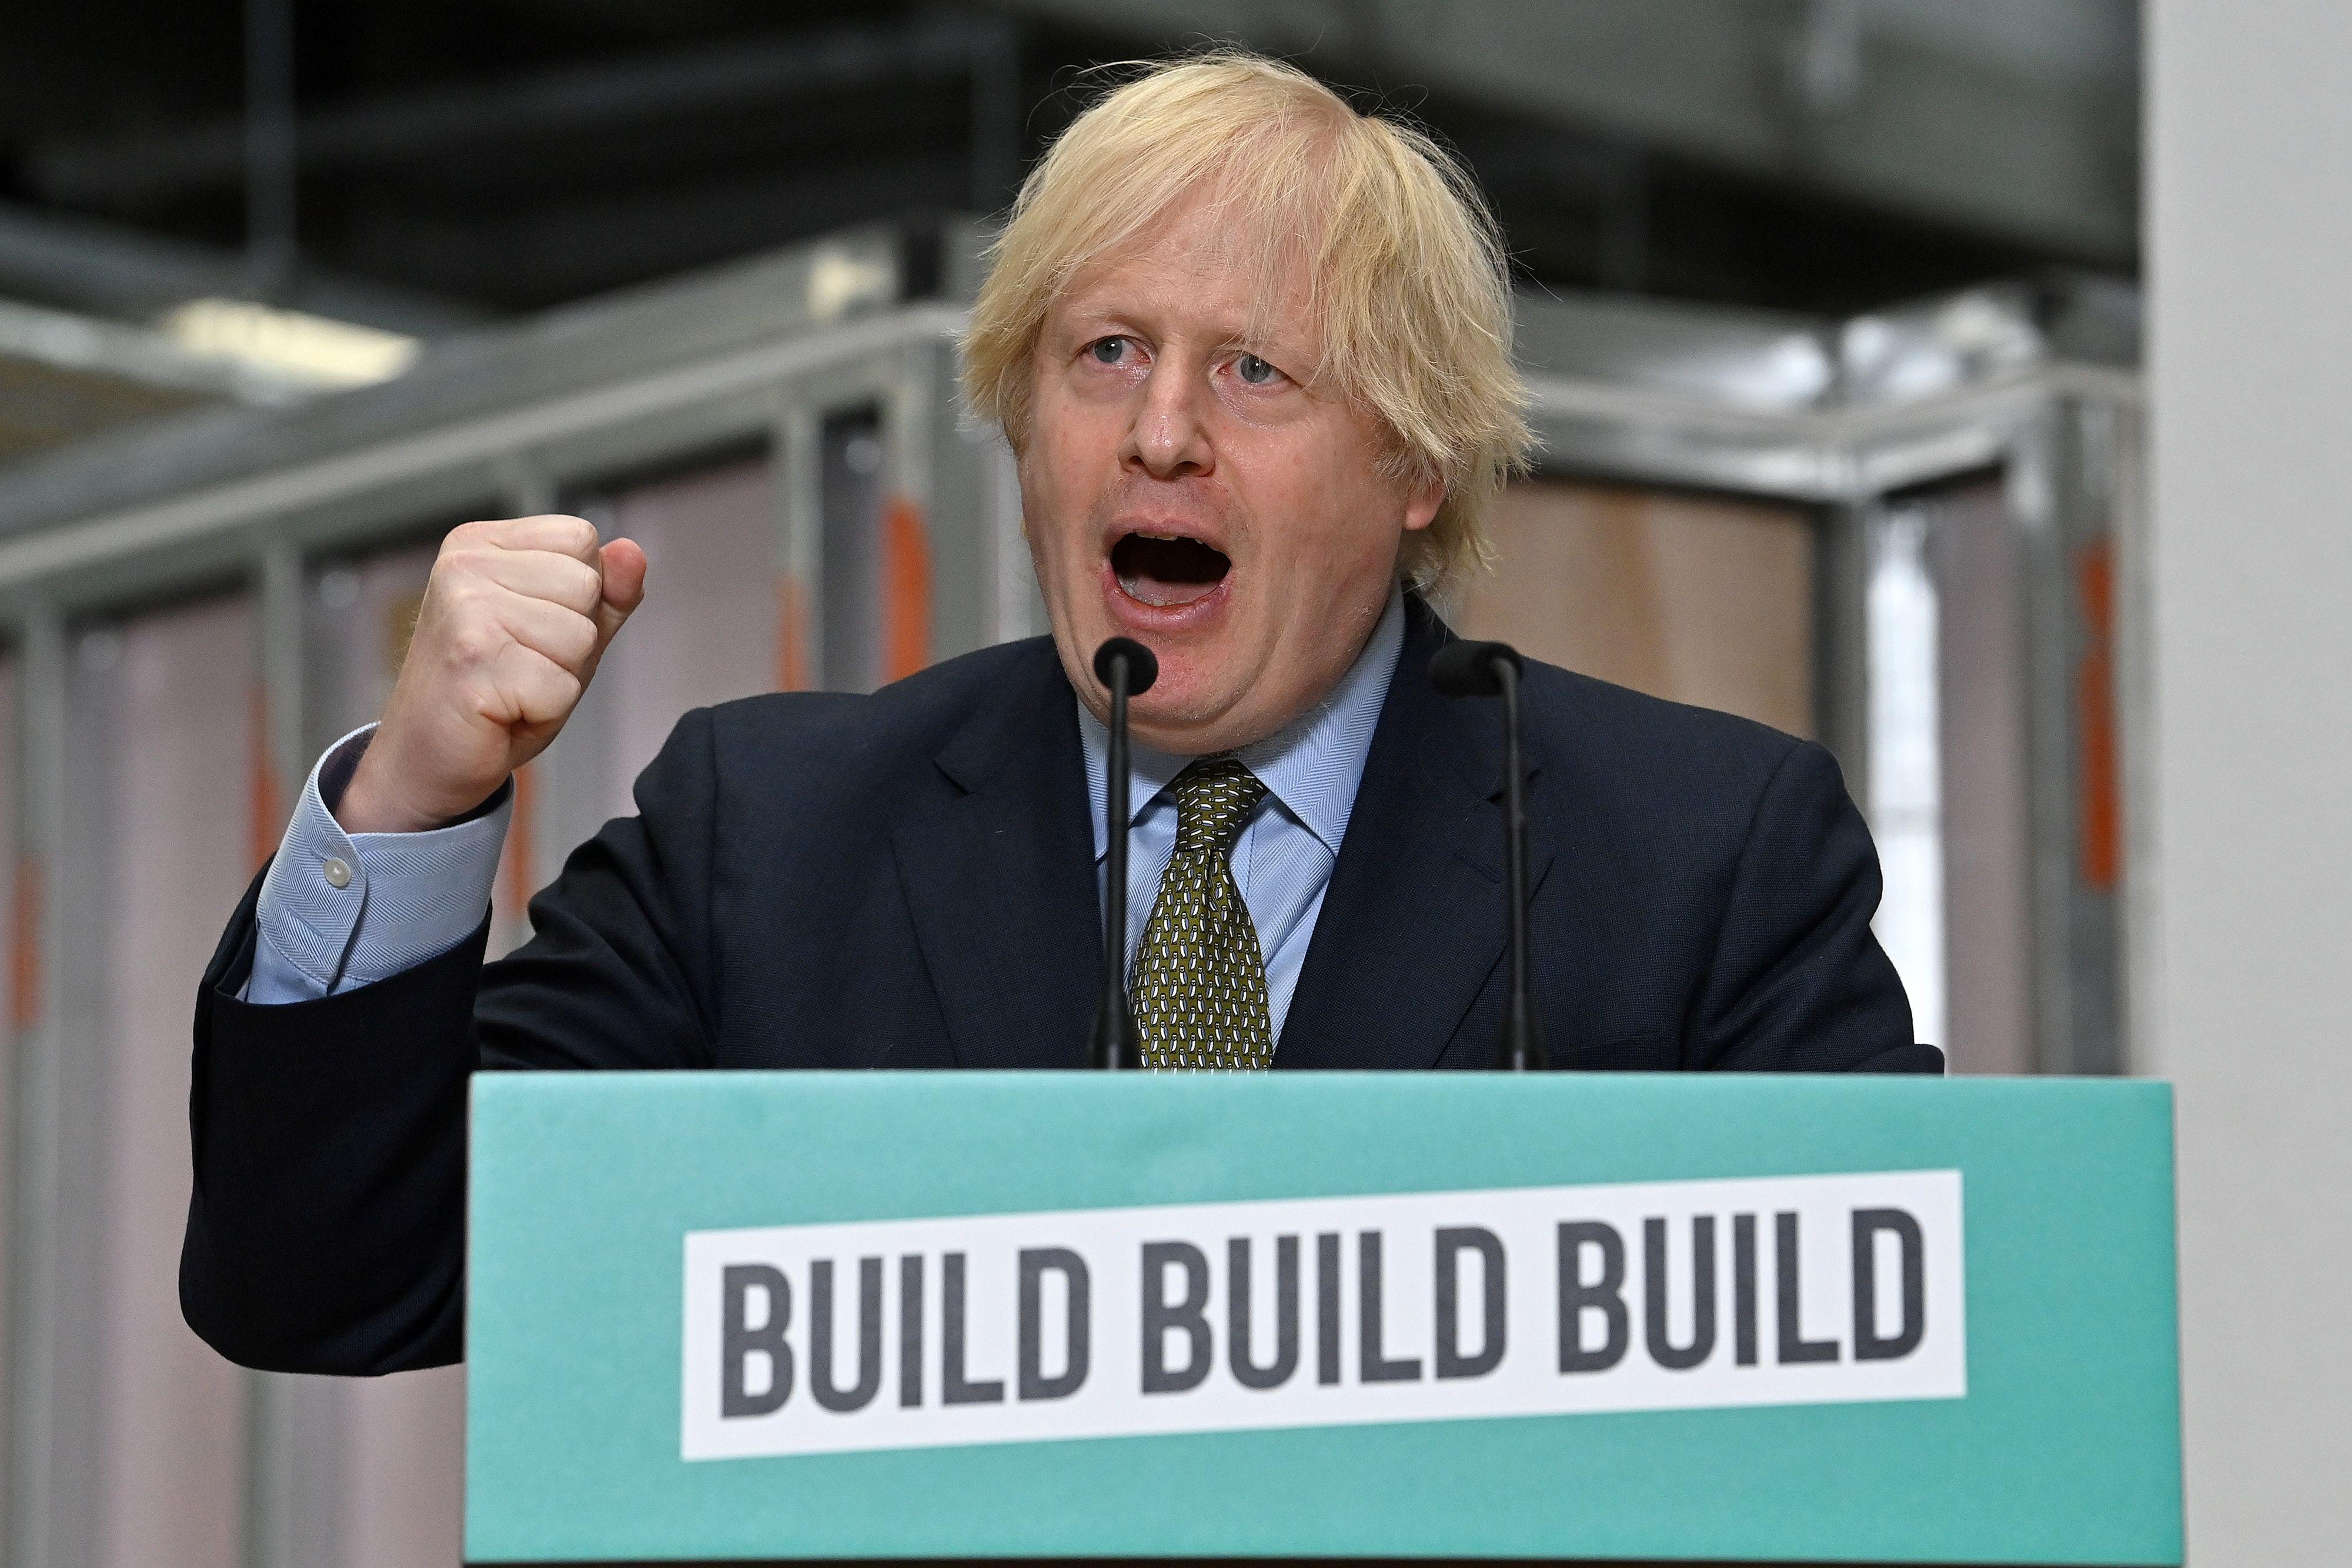 Boris Johnson raises his fist while speaking at a lectern with a sign that reads "Build, Build, Build."